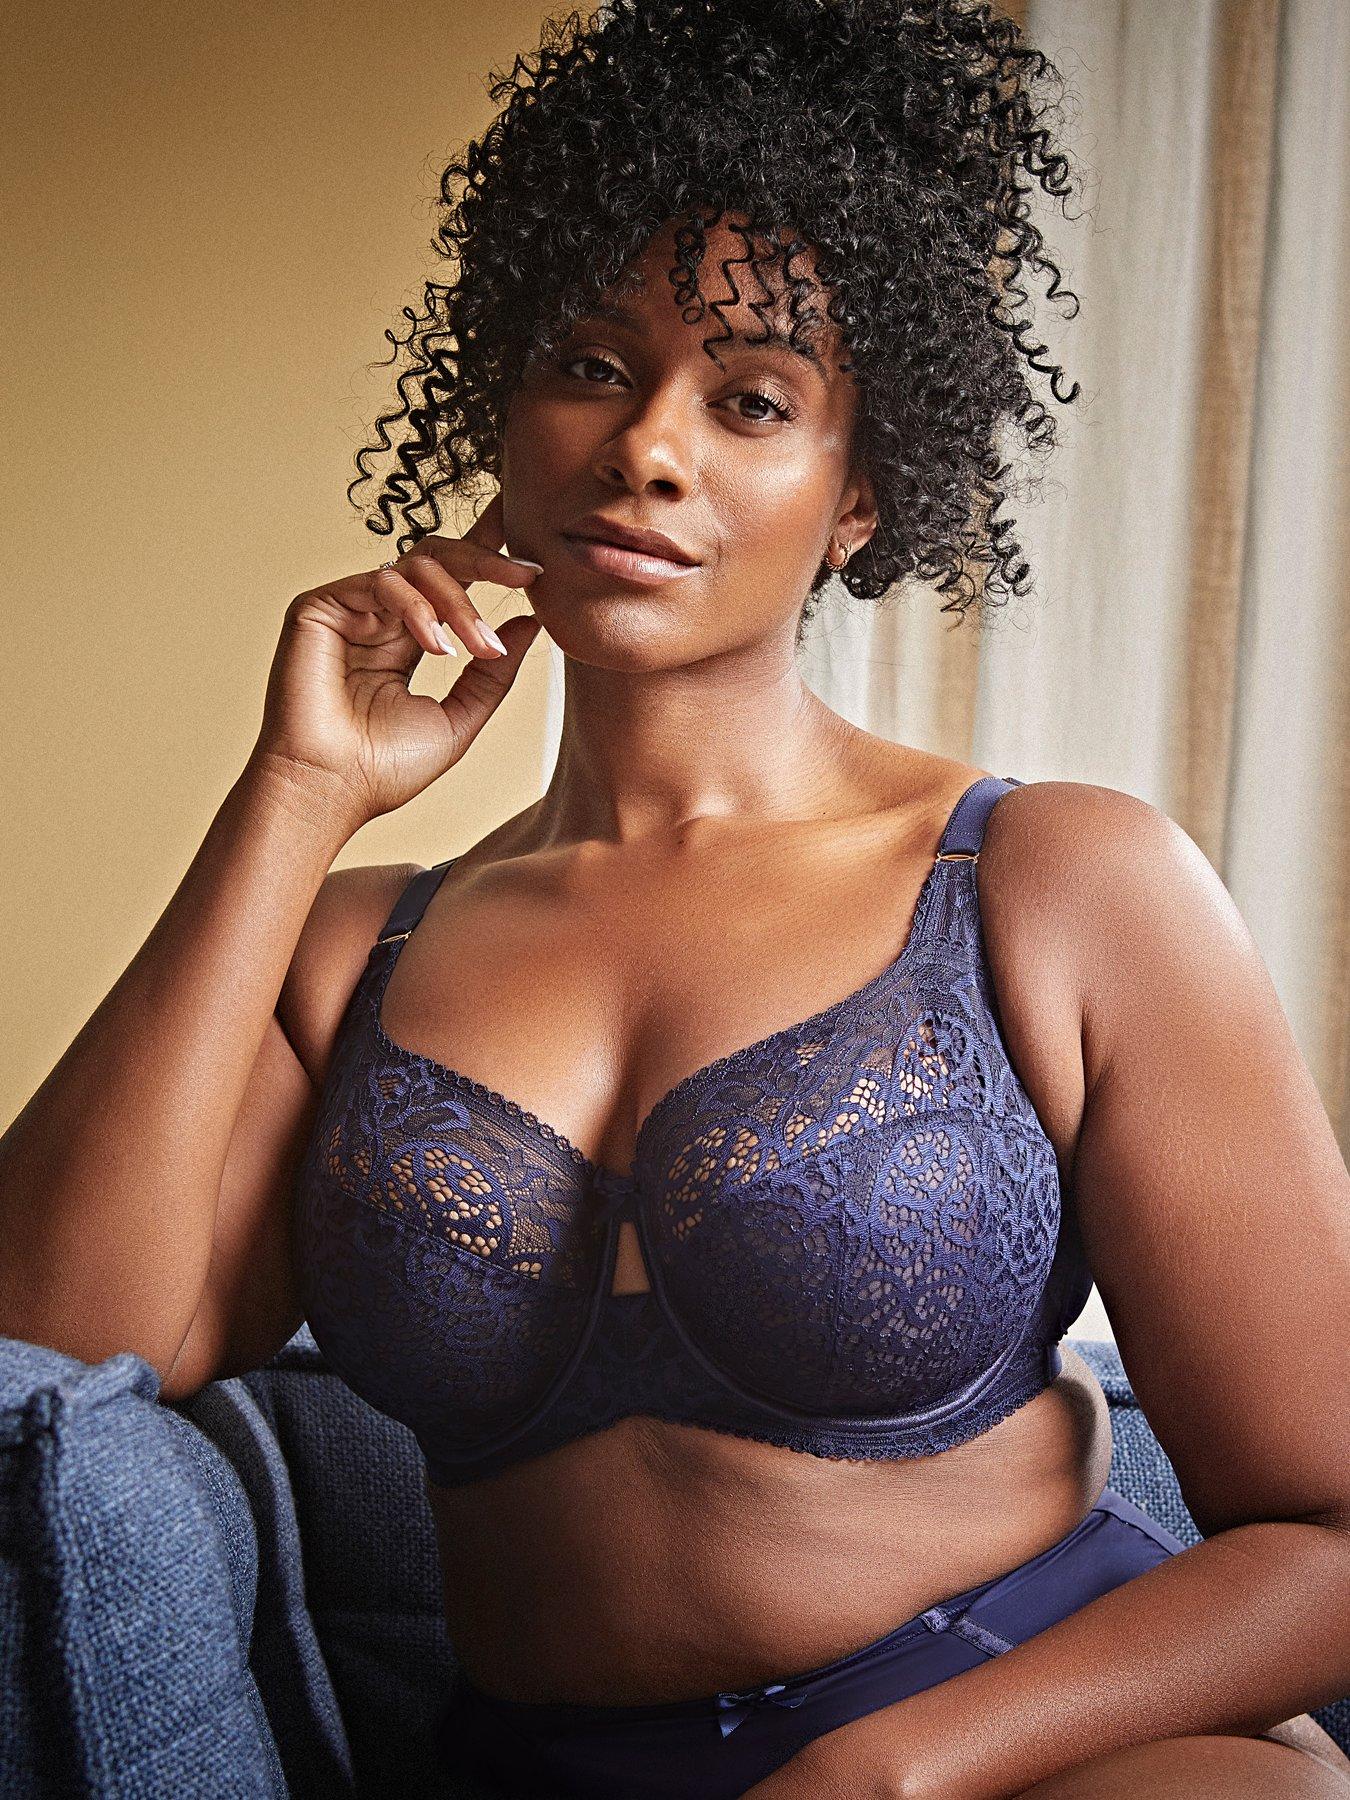 Sculptresse Bliss Full Cup Bra - Red